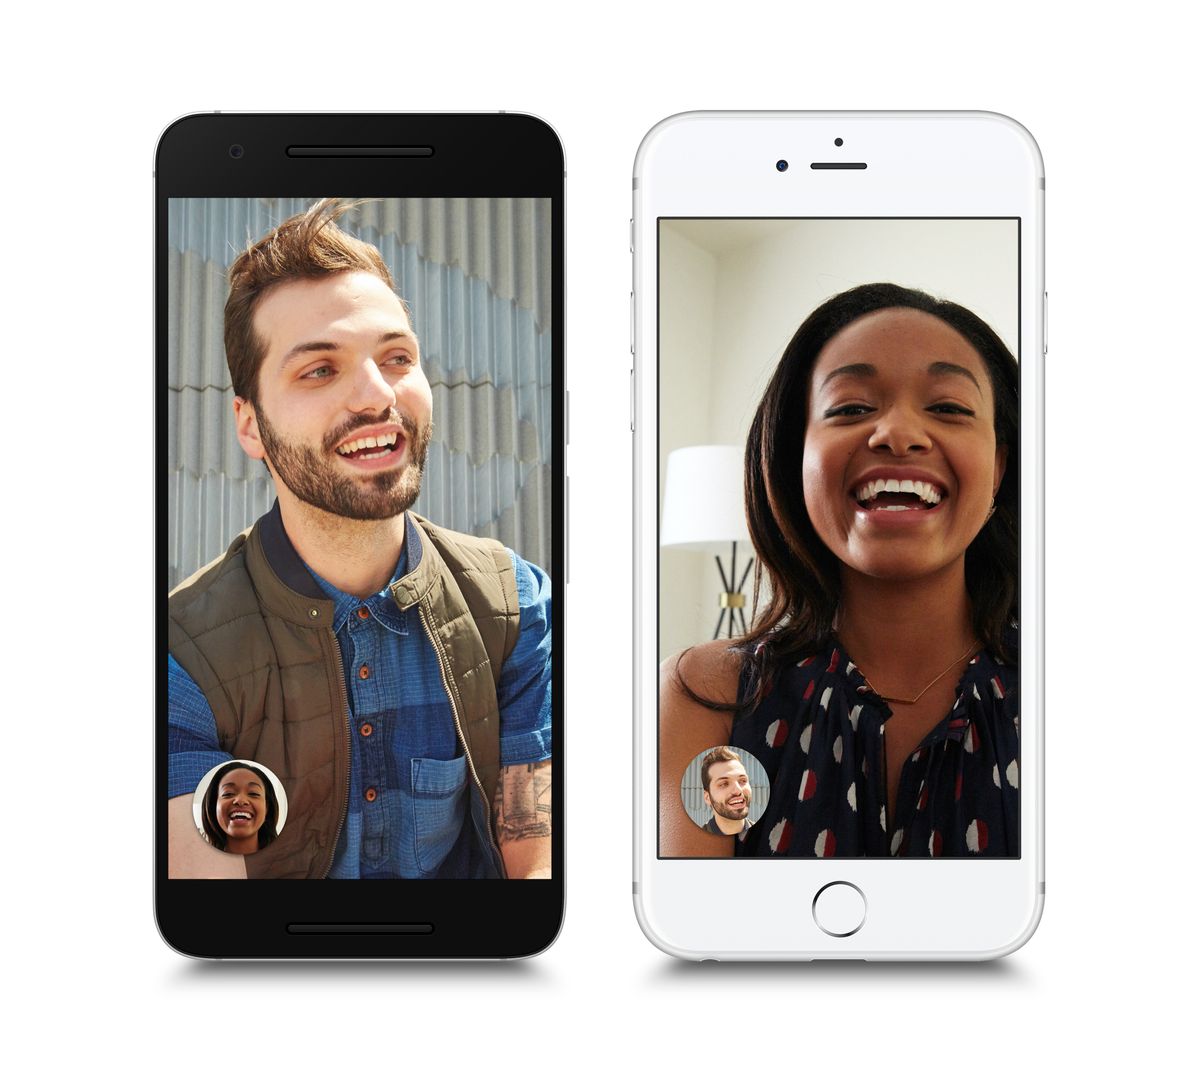 This image provided by Google shows its video chatting app on mobile devices. The app, dubbed Duo, represents Google's response to other popular video calling options, including Apple's FaceTime, Microsoft's Skype and Facebook's Messenger app. The new app, announced in May, is being released Tuesday, Aug. 16, 2016, as a free service for phones running on Google's Android operating system as well as Apple's iPhones. (Google via AP) (AP)